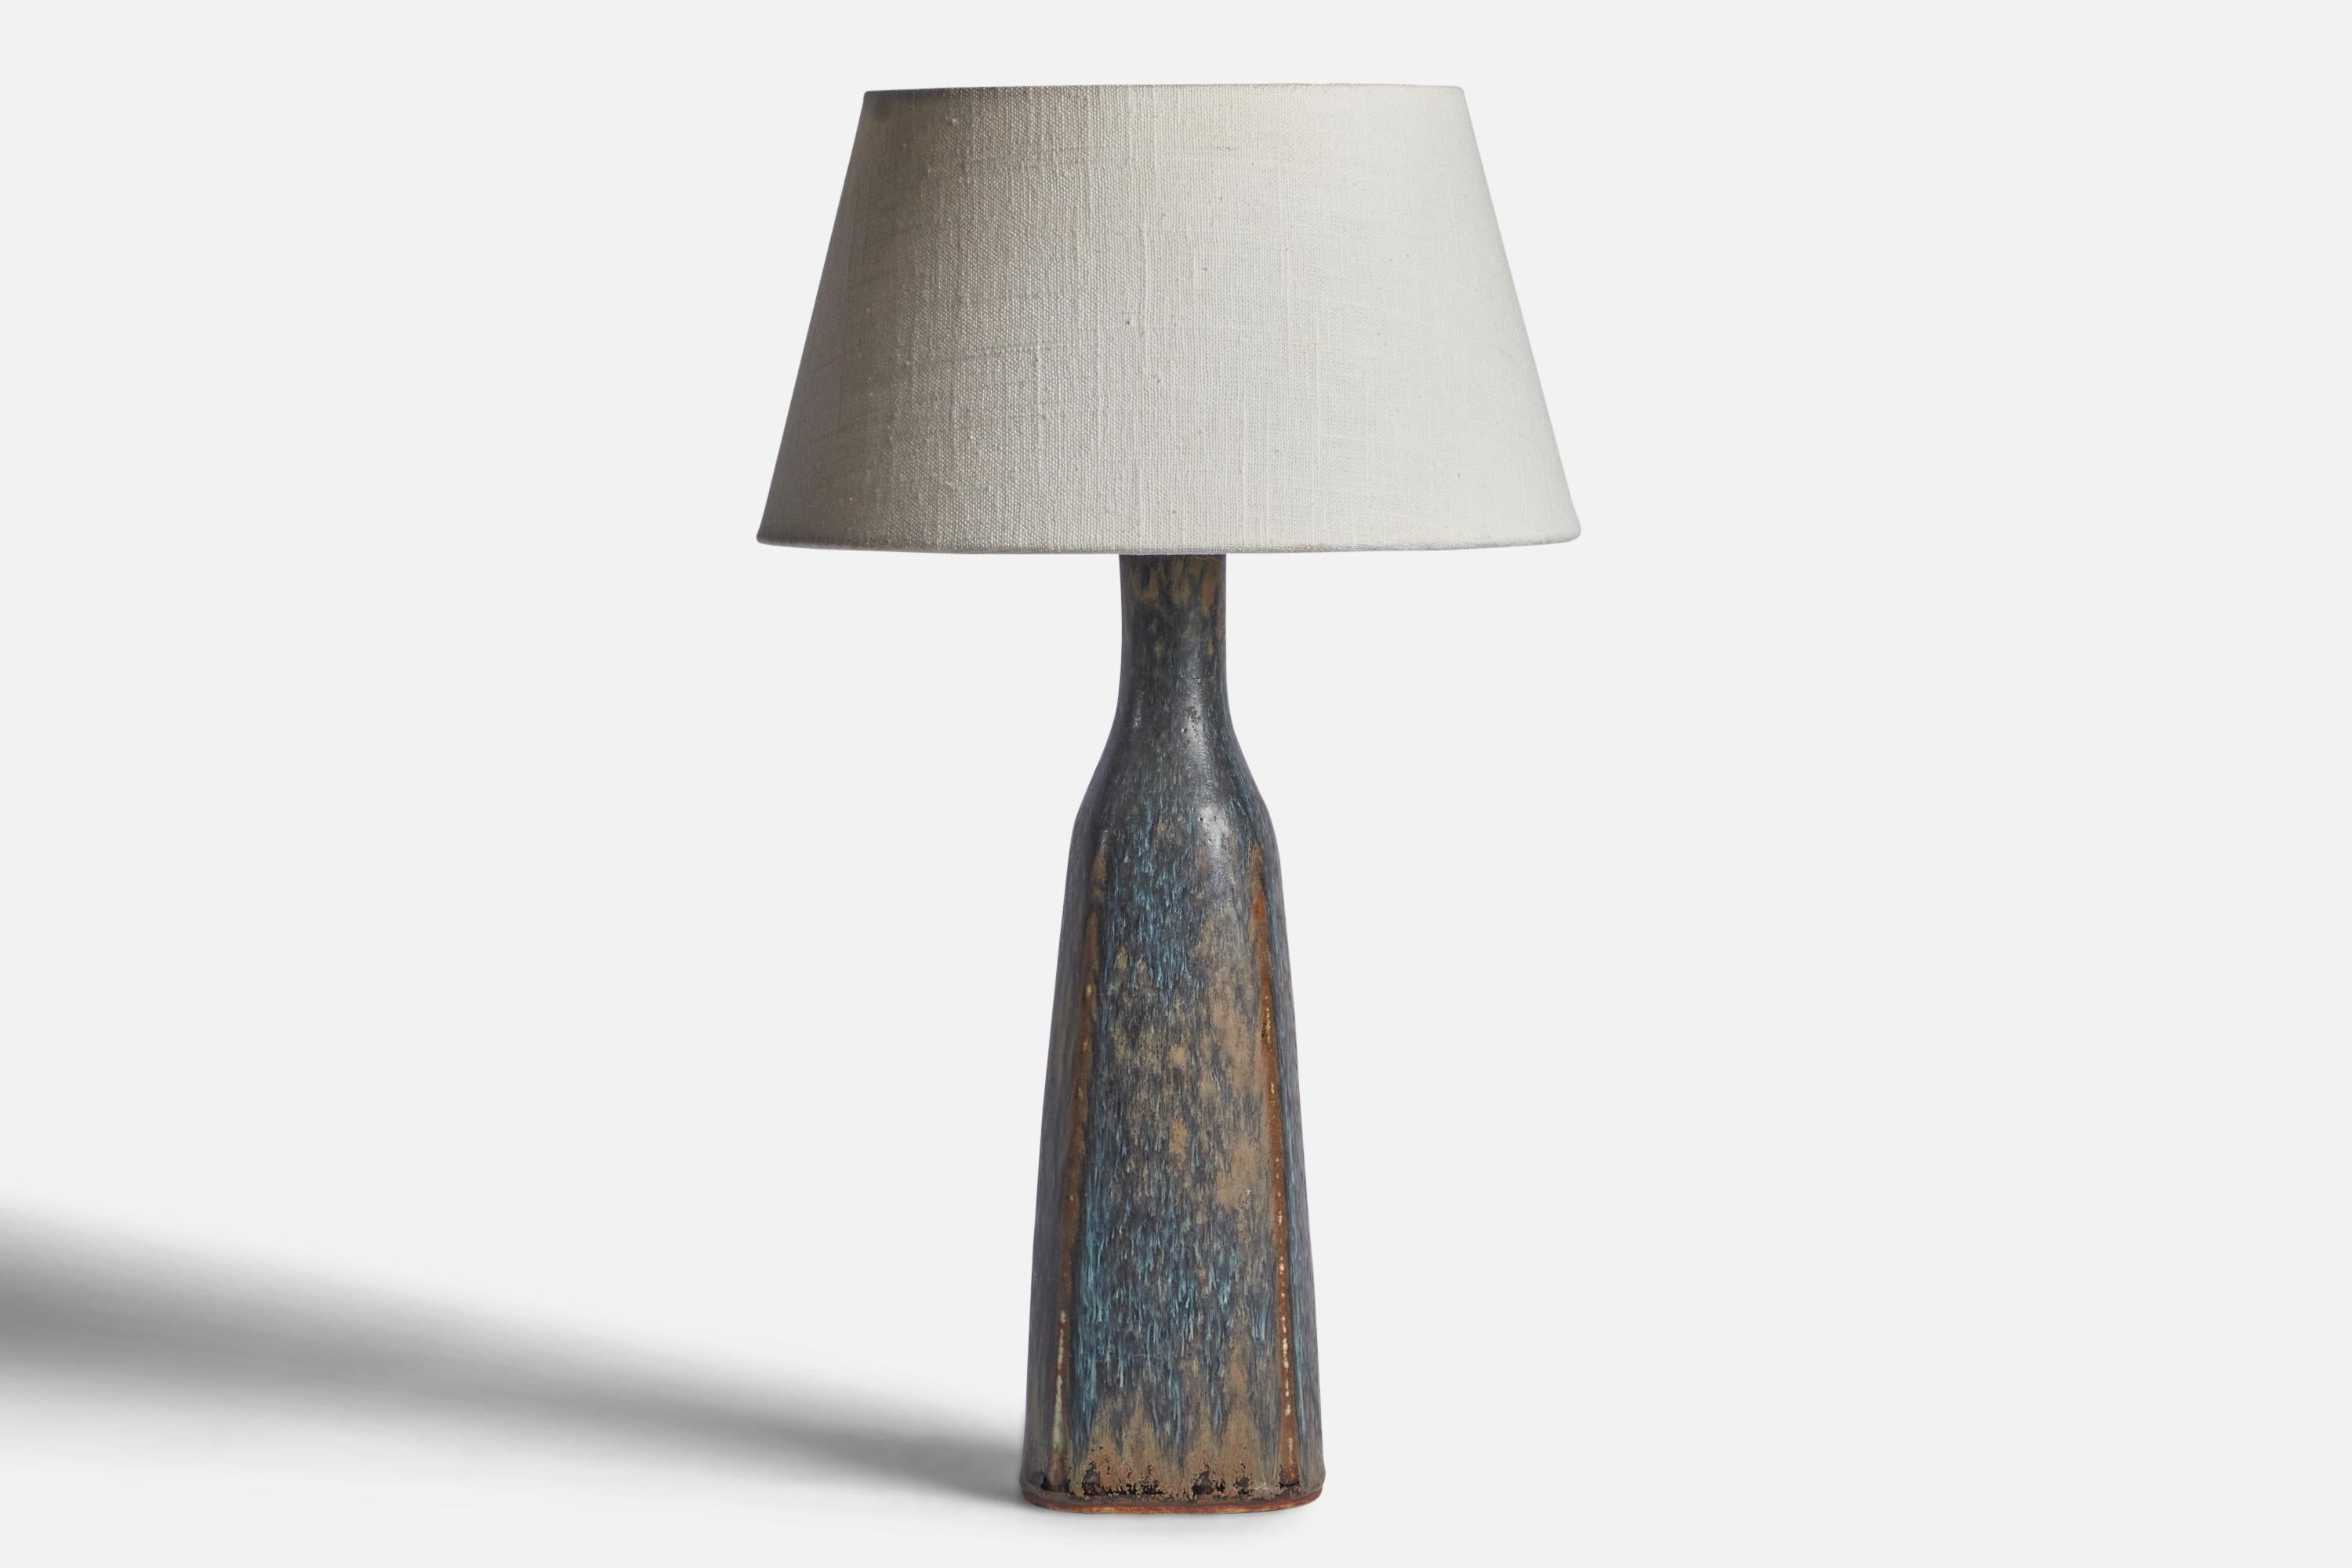 A black, blue and brown-glazed stoneware table lamp designed by Carl-Harry Stålhane and produced by Rörstrand, Sweden, 1950s.

Dimensions of Lamp (inches): 14.15” H x 3.75” Diameter
Dimensions of Shade (inches): 7” Top Diameter x 10” Bottom Diameter